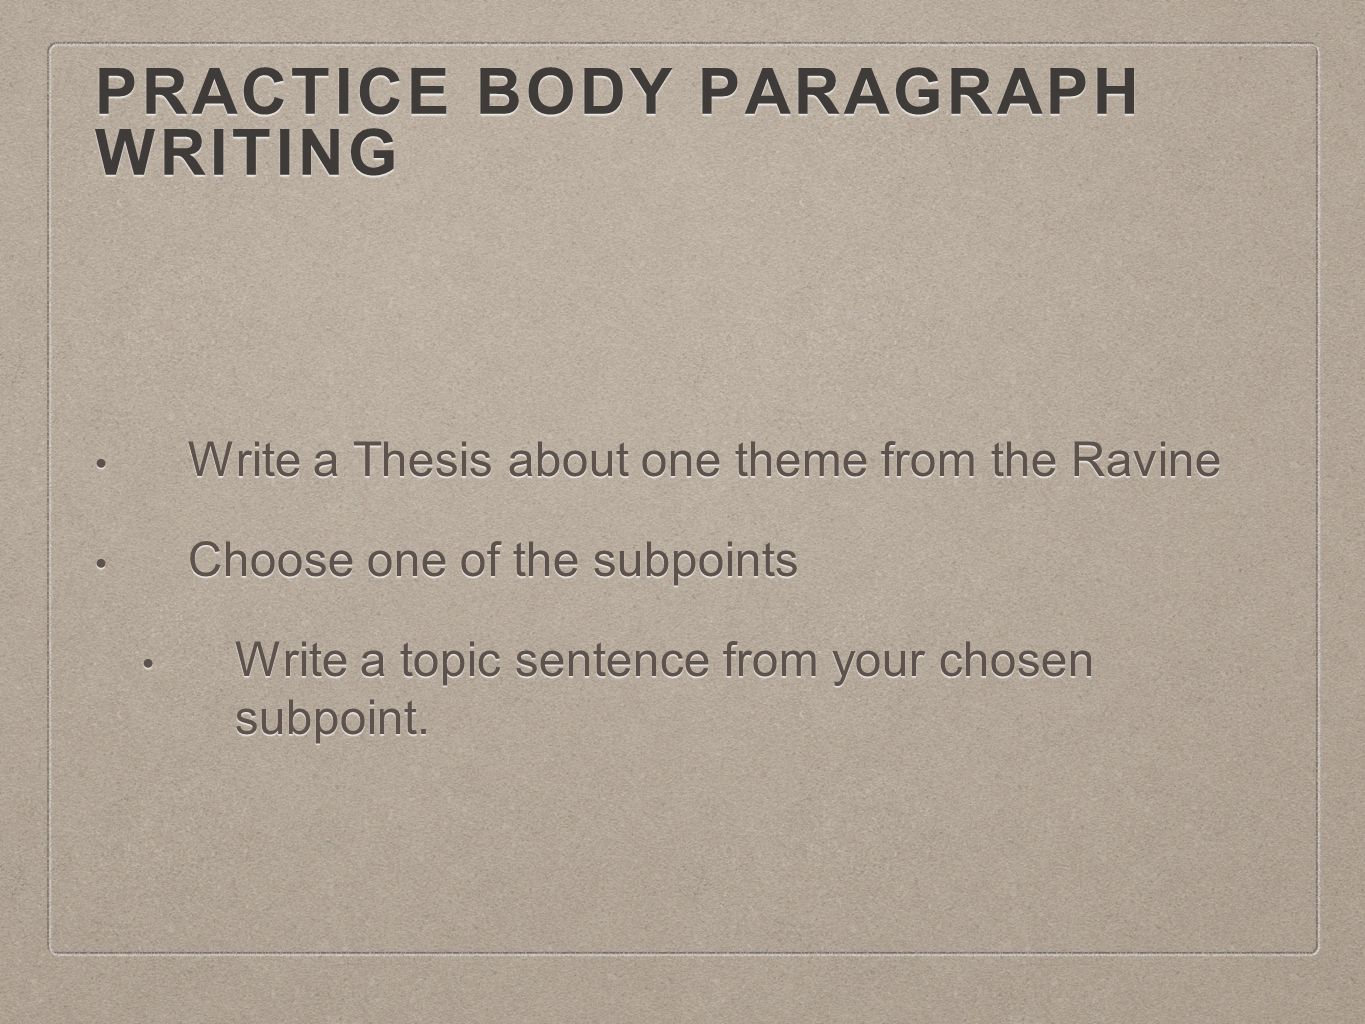 Practice Body Paragraph Writing